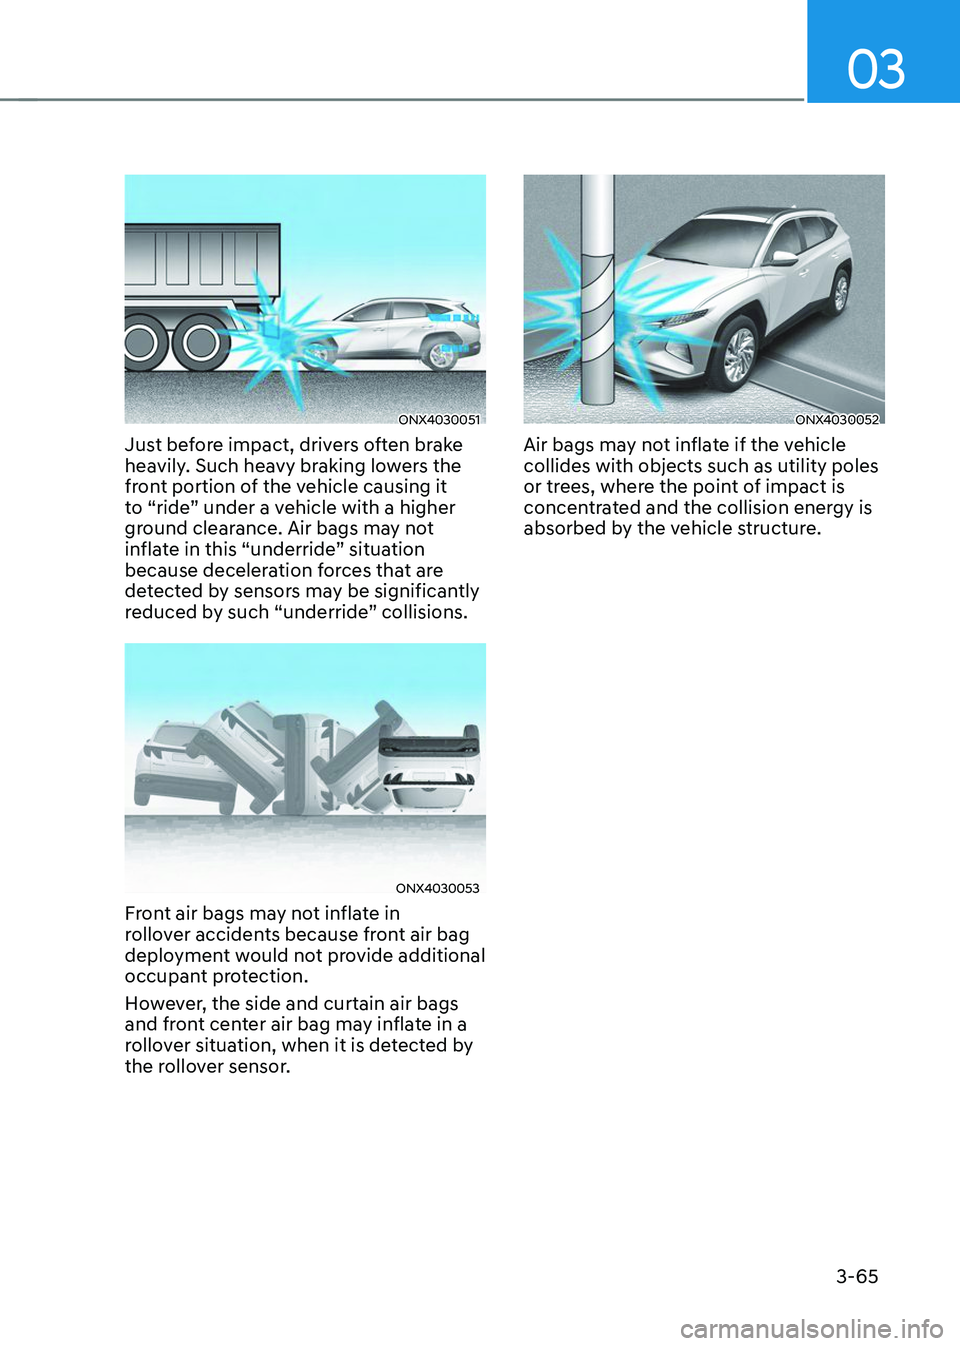 HYUNDAI TUCSON 2023  Owners Manual 03
3-65
ONX4030051
Just before impact, drivers often brake 
heavily. Such heavy braking lowers the 
front portion of the vehicle causing it 
to “ride” under a vehicle with a higher 
ground clearan